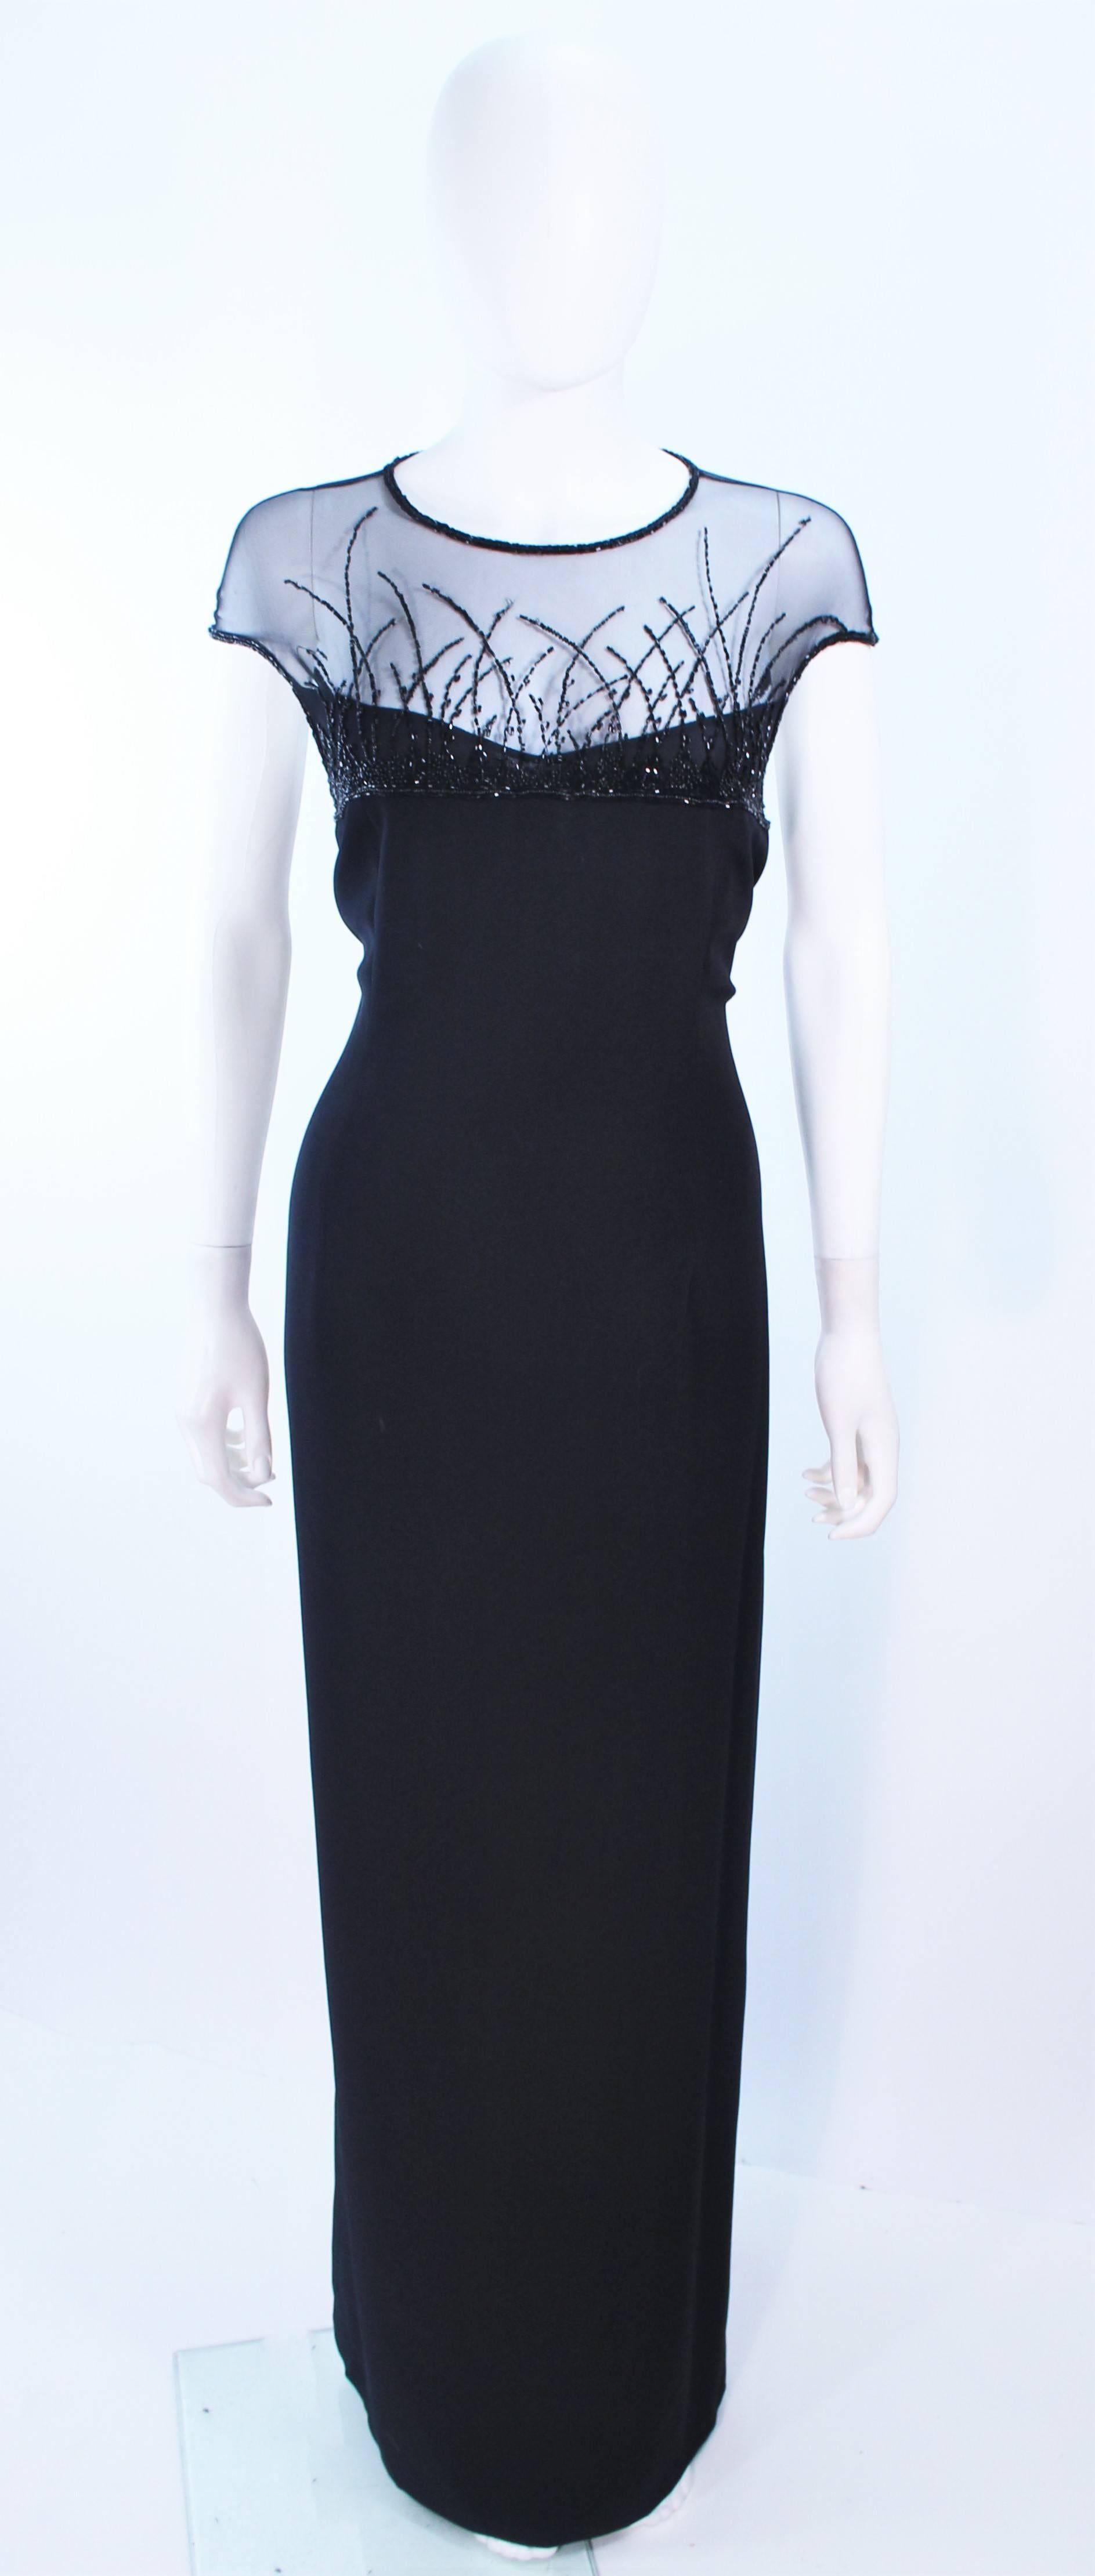 This Bob Mackie gown of a black crepe fabric with a beaded sheer mesh bodice. There is a center back zipper closure with train. In excellent vintage condition.

**Please cross-reference measurements for personal accuracy. Size in description box